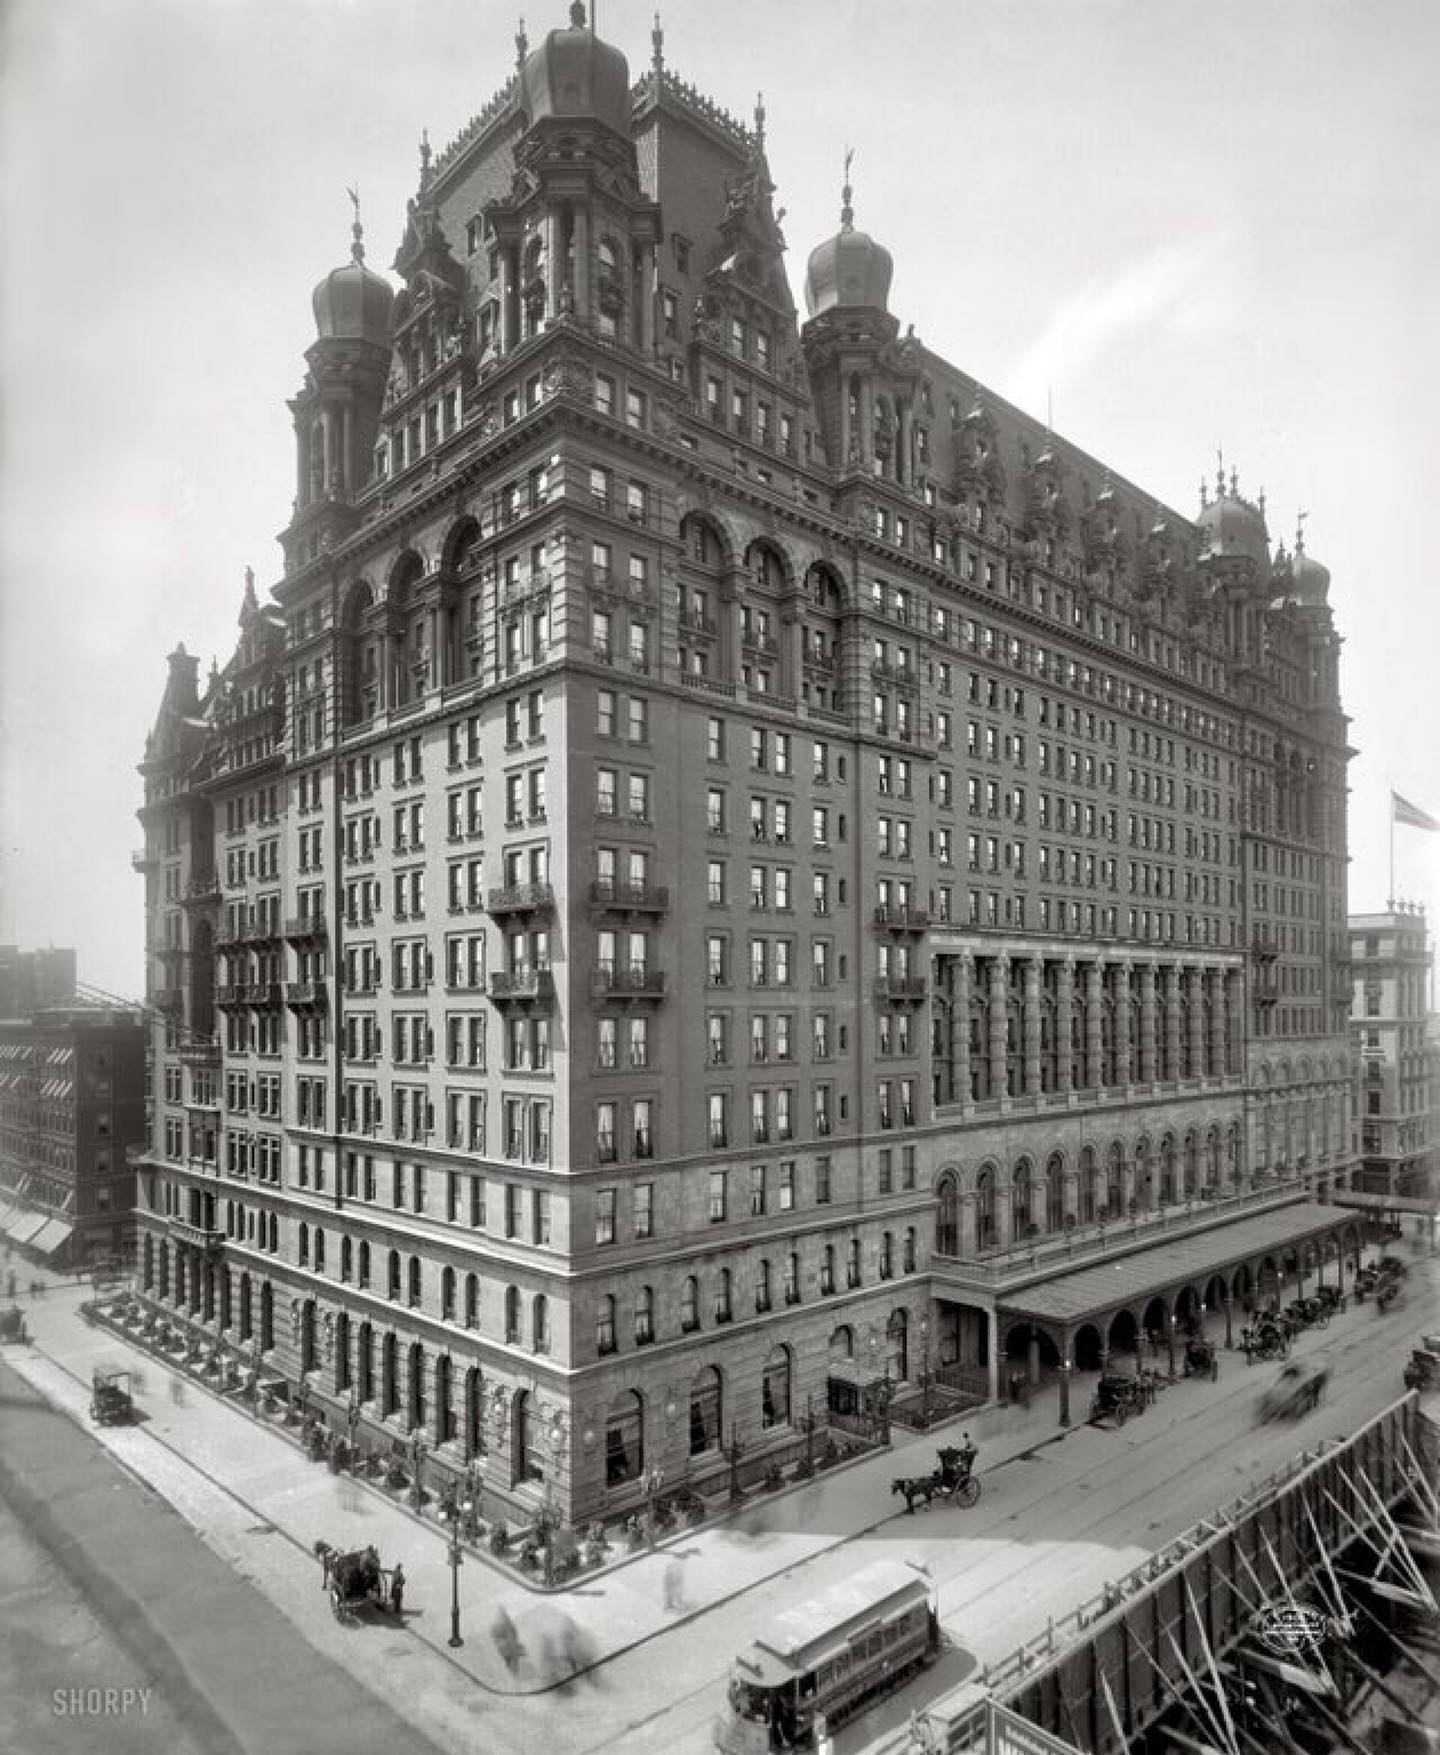 Waldorf-Astoria Hotel in NYC, demolished in 1929 to serve as the site for the Empire State building.jpg